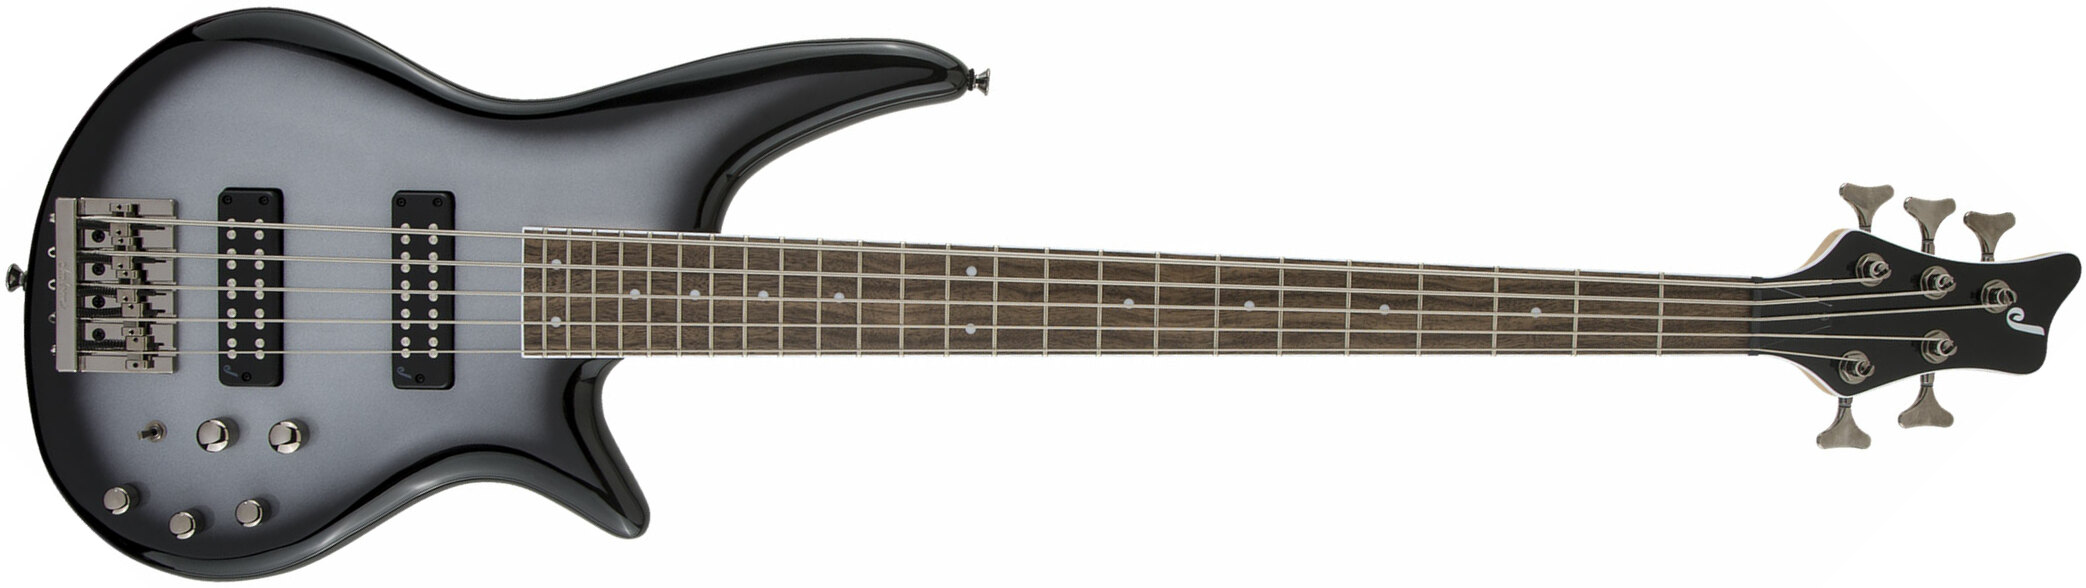 Jackson Spectra Bass Js3v 5c Active Lau - Silverburst - Solid body electric bass - Main picture